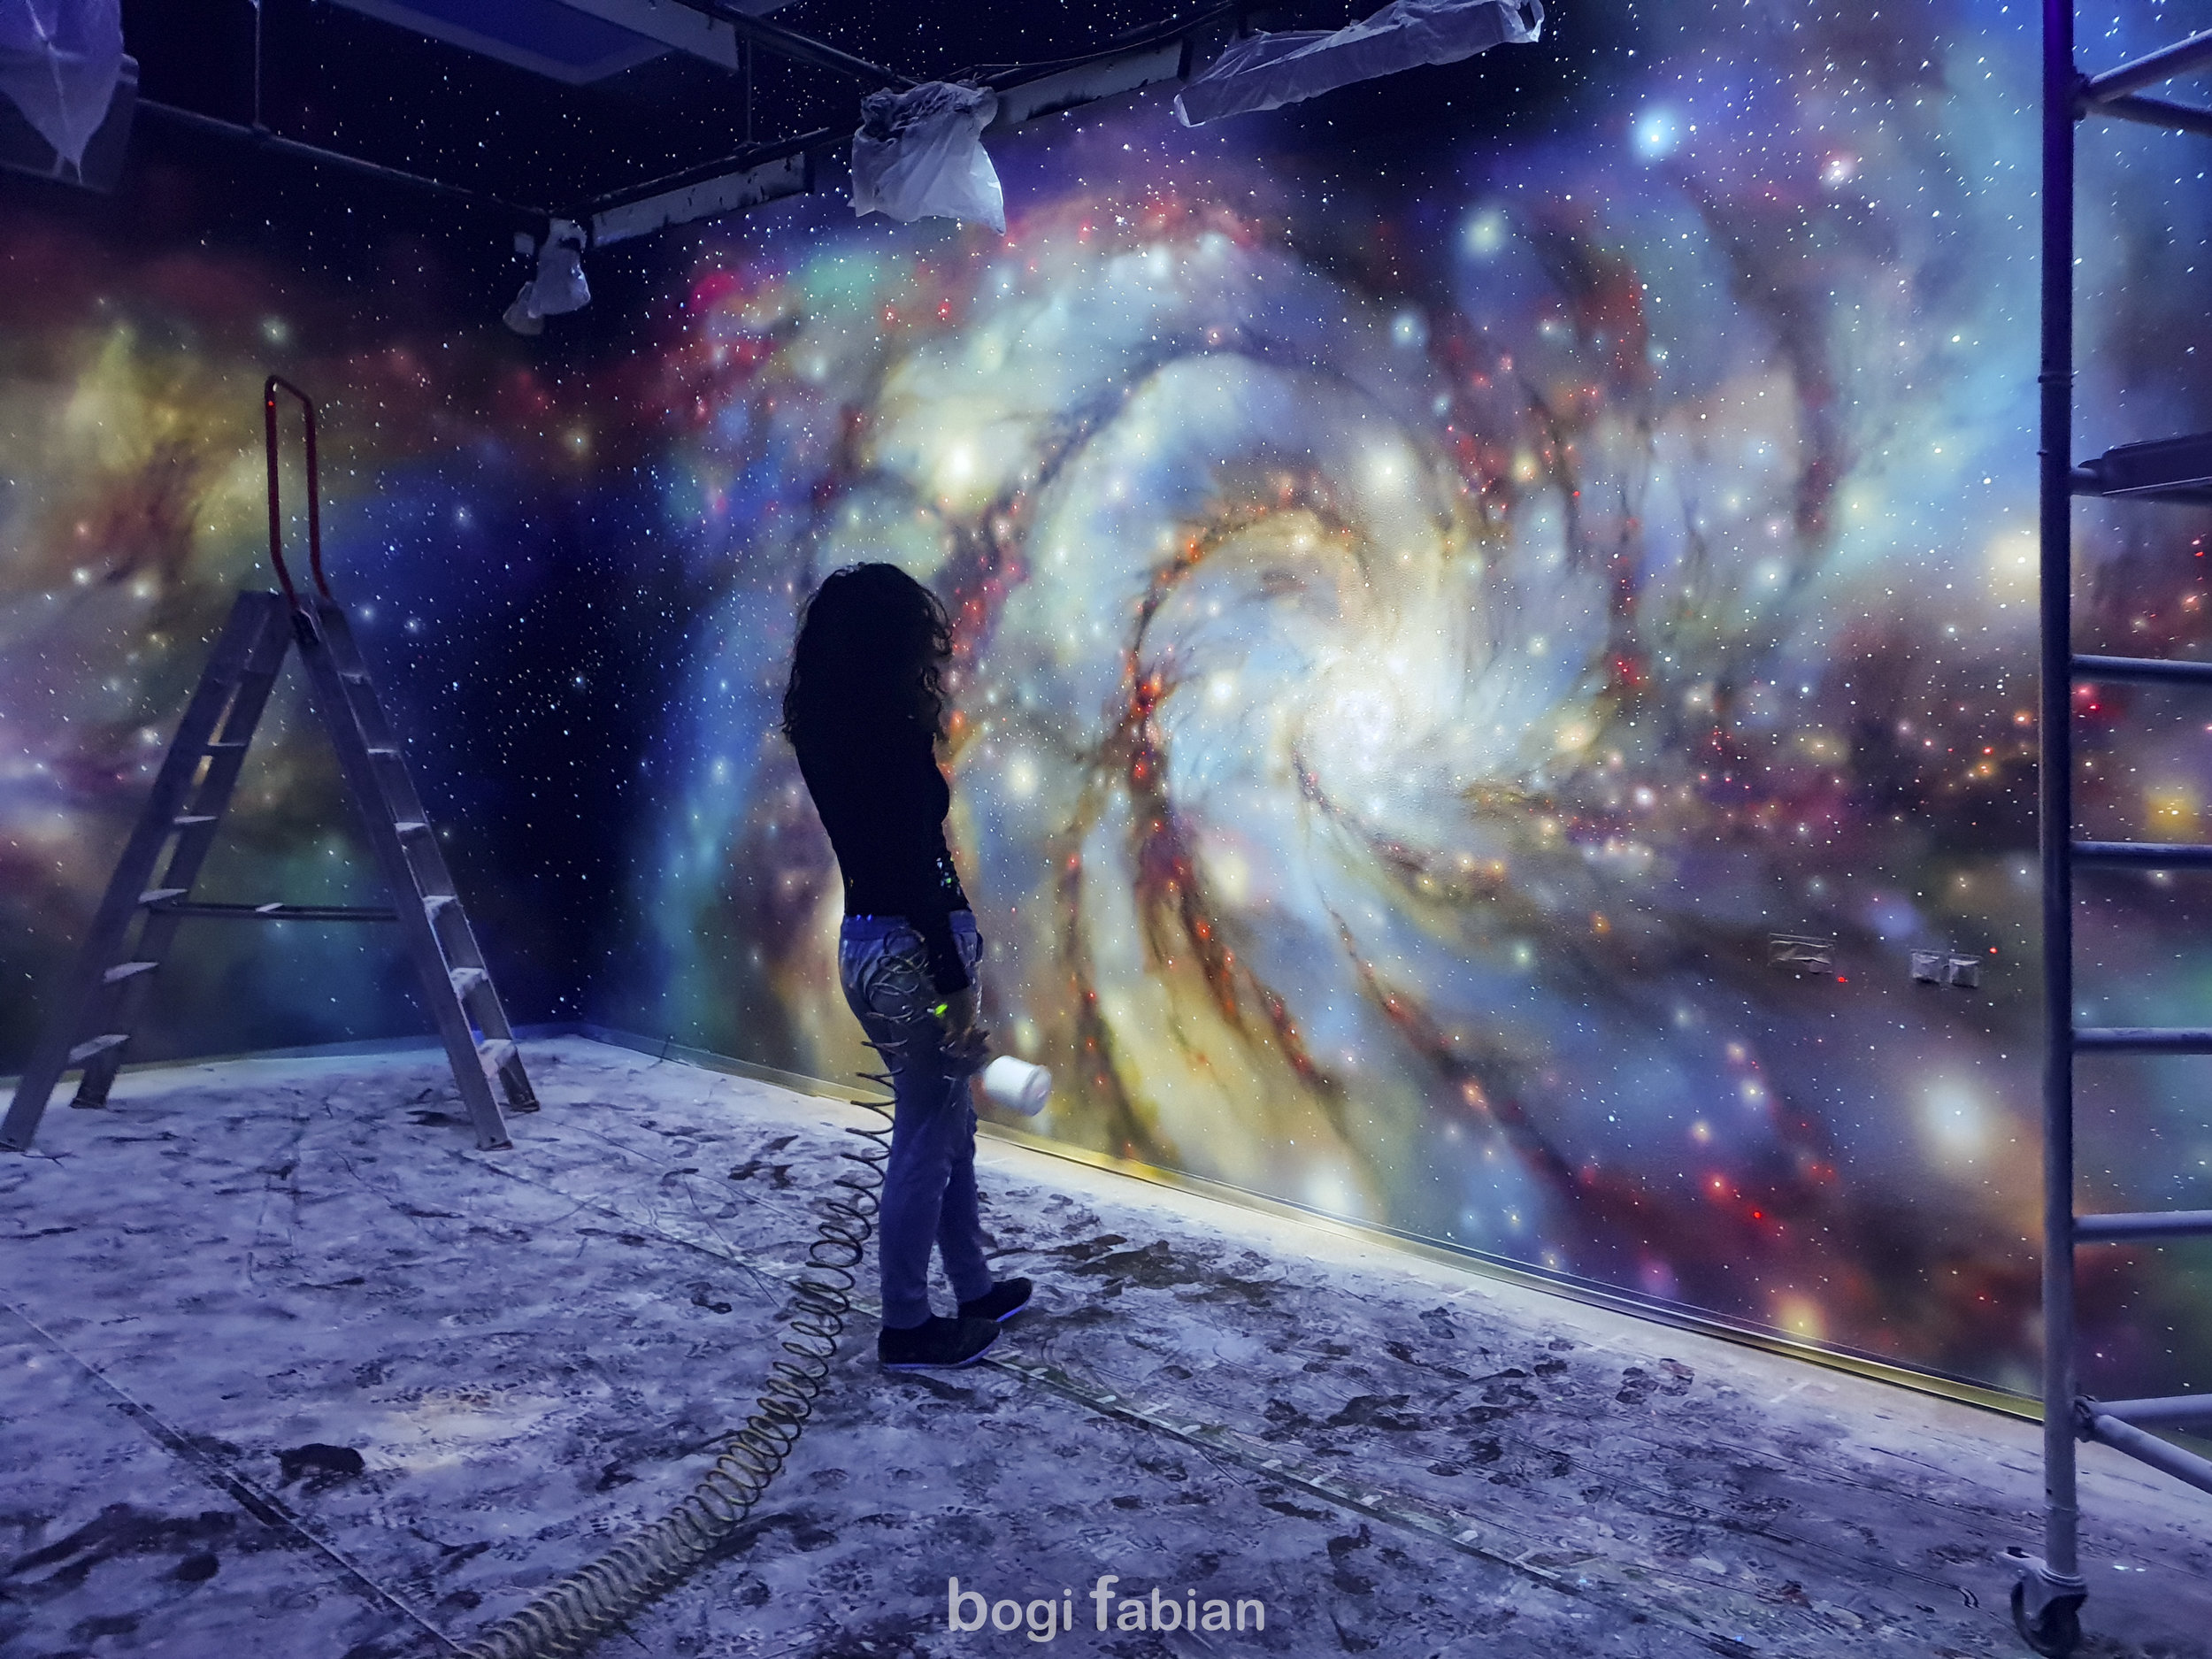 Glowing Galaxy Murals Connecting You To The Cosmos